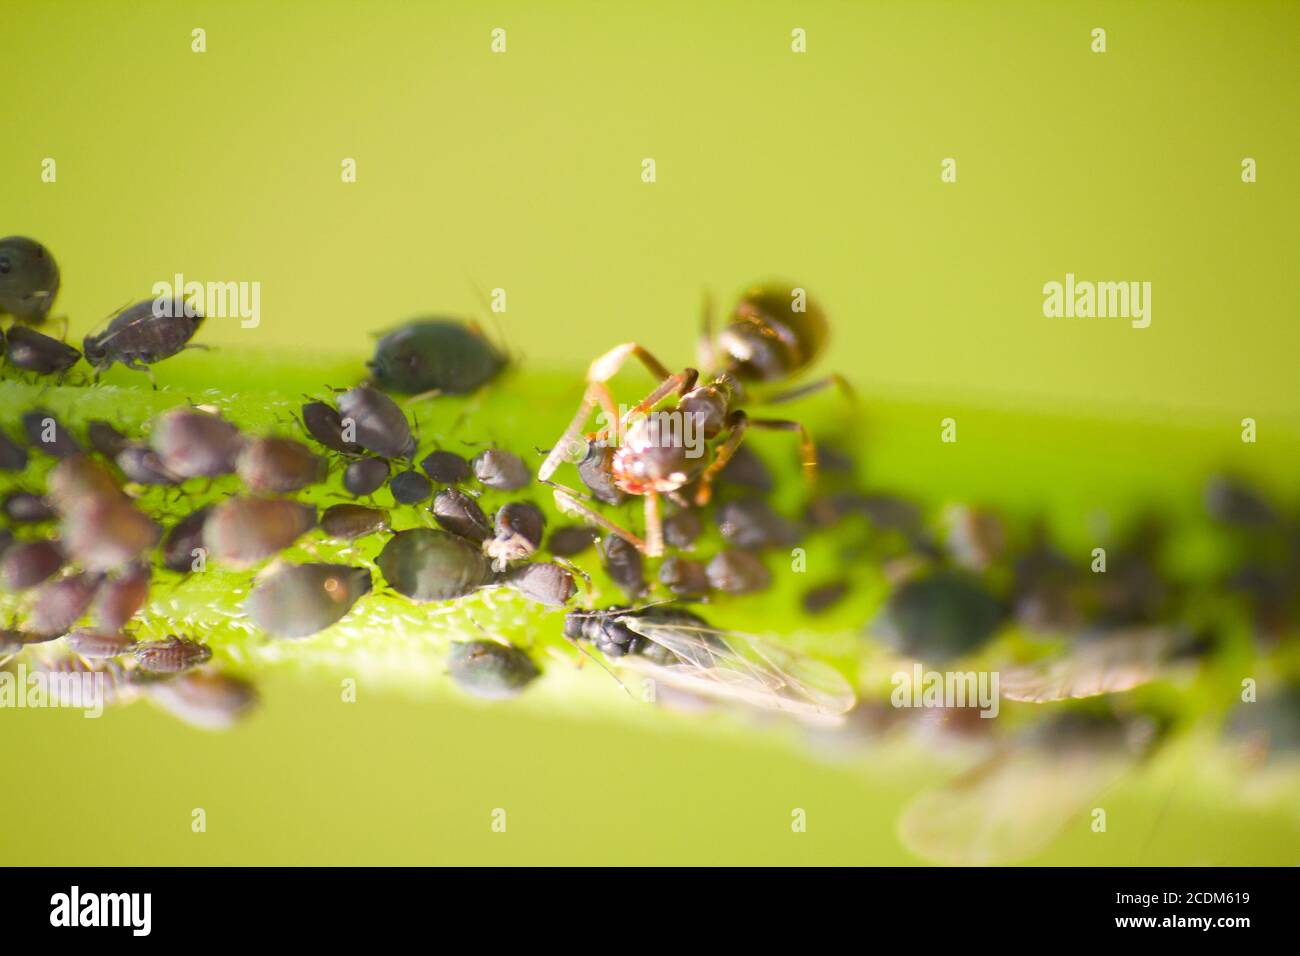 ant to milk a plant louse an insect macro Stock Photo